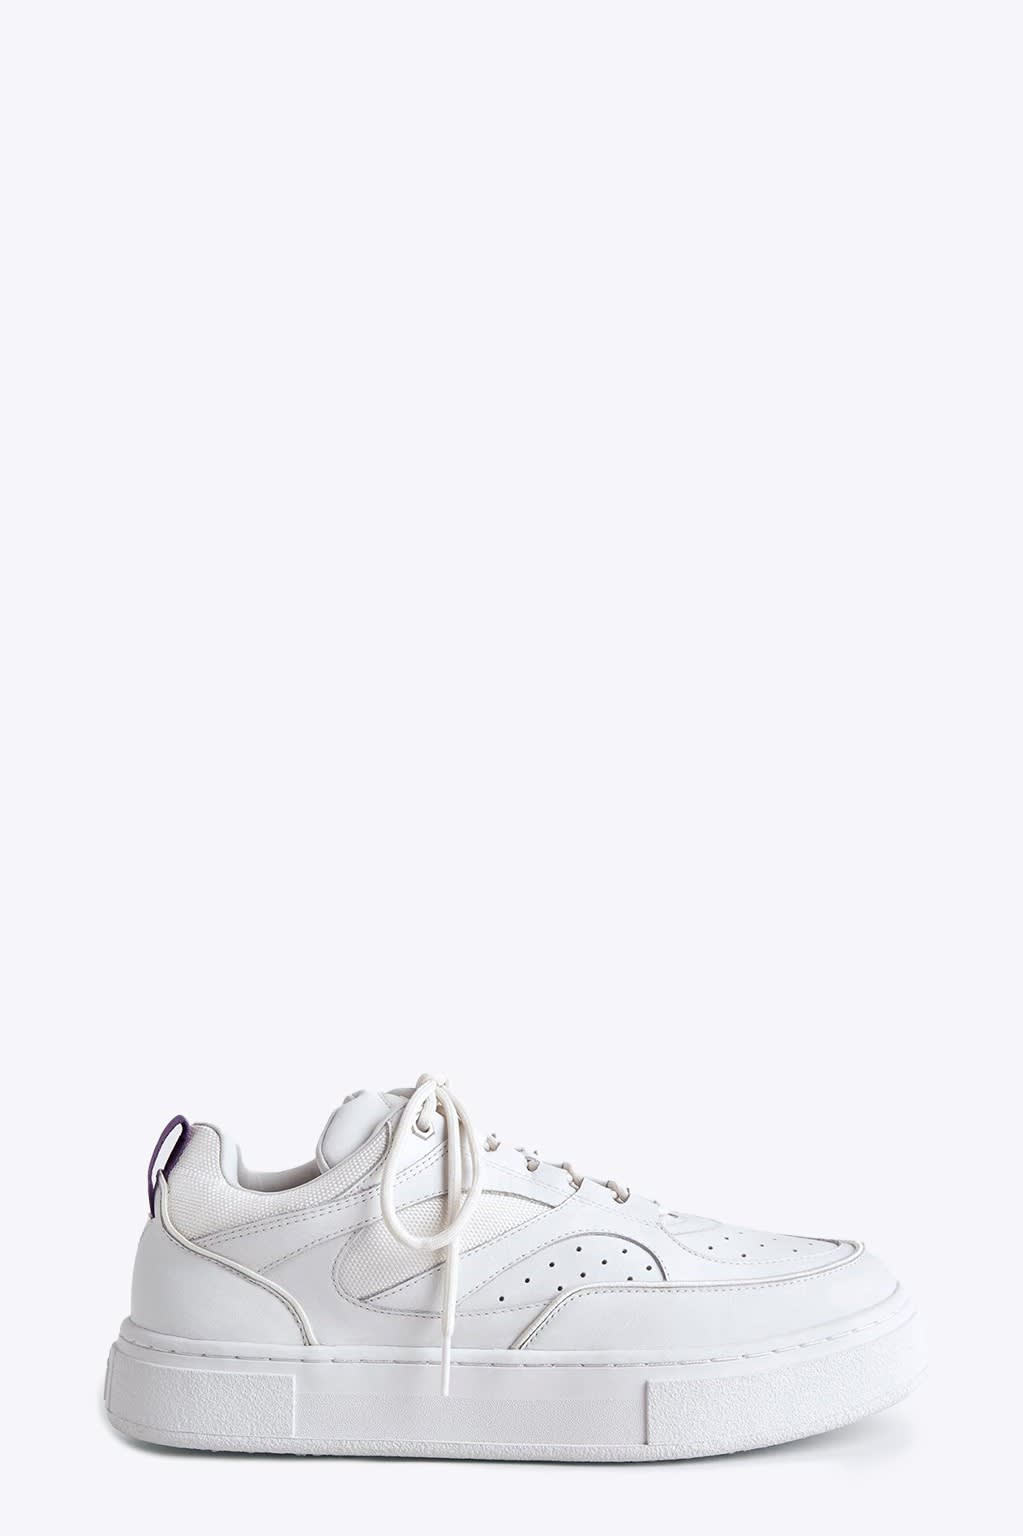 Eytys Sidney White leather low sneaker - Sidney